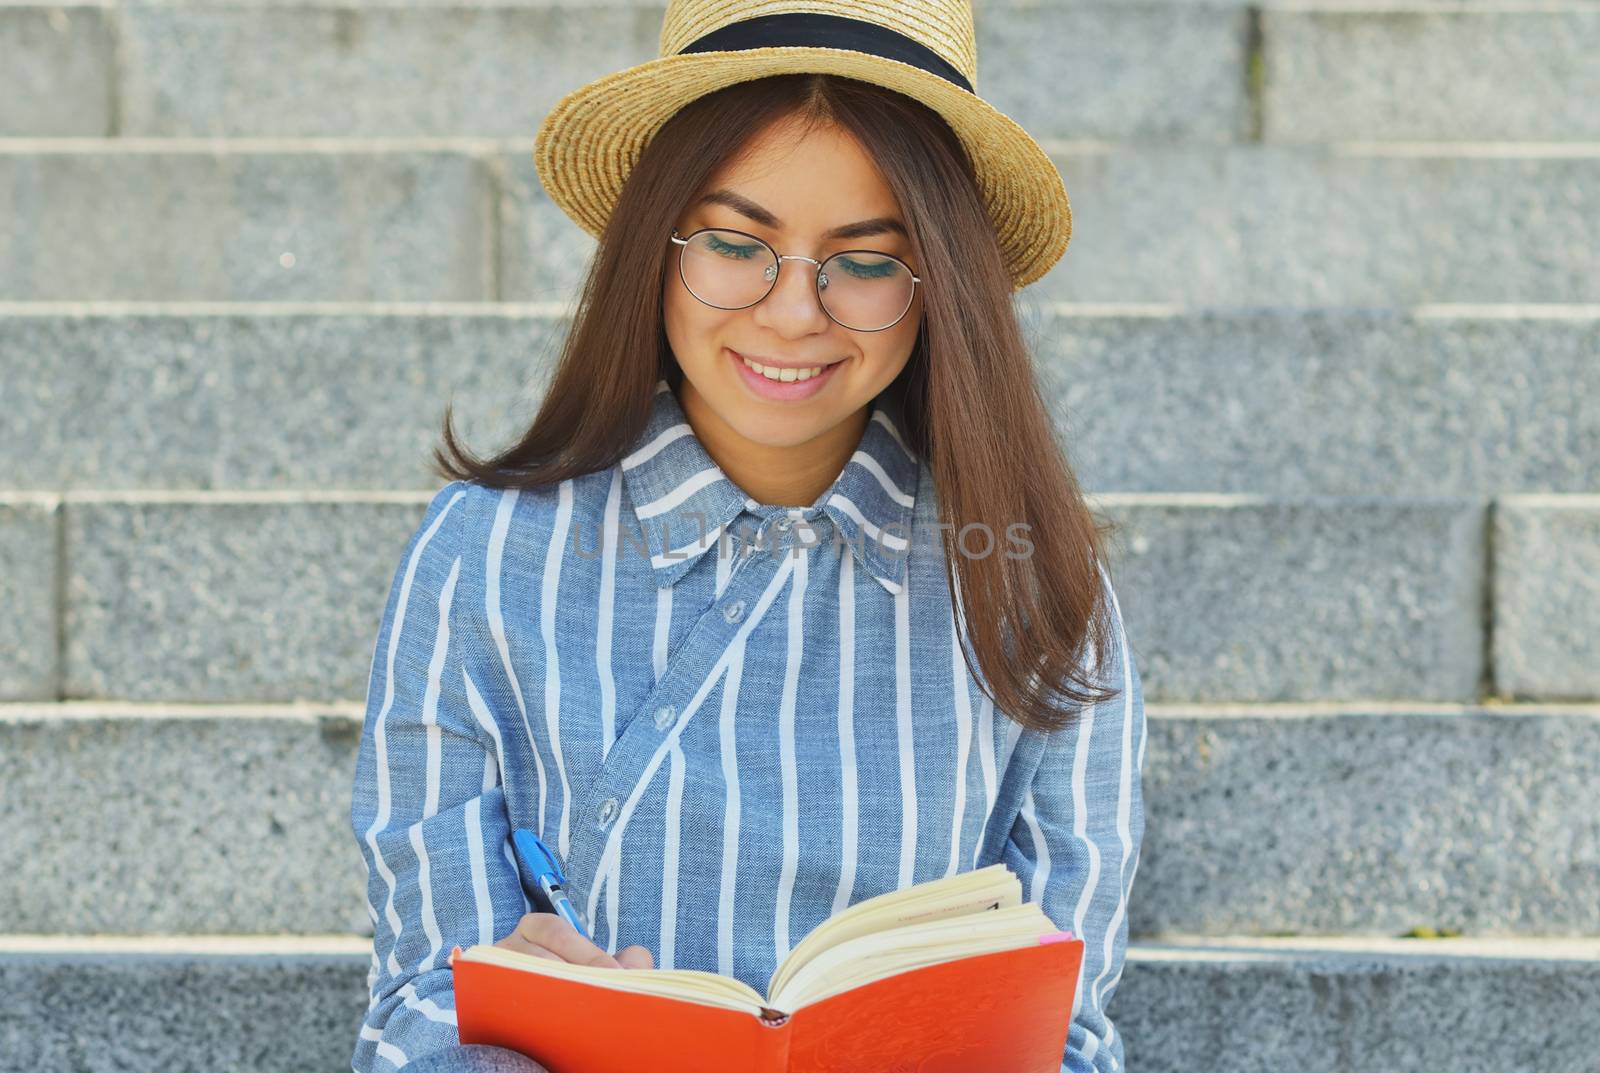 Portrait of a young Asian student in glasses with a hat dressed in a blue striped shirt who looks at the notebook writing tasks, smiling at the camera